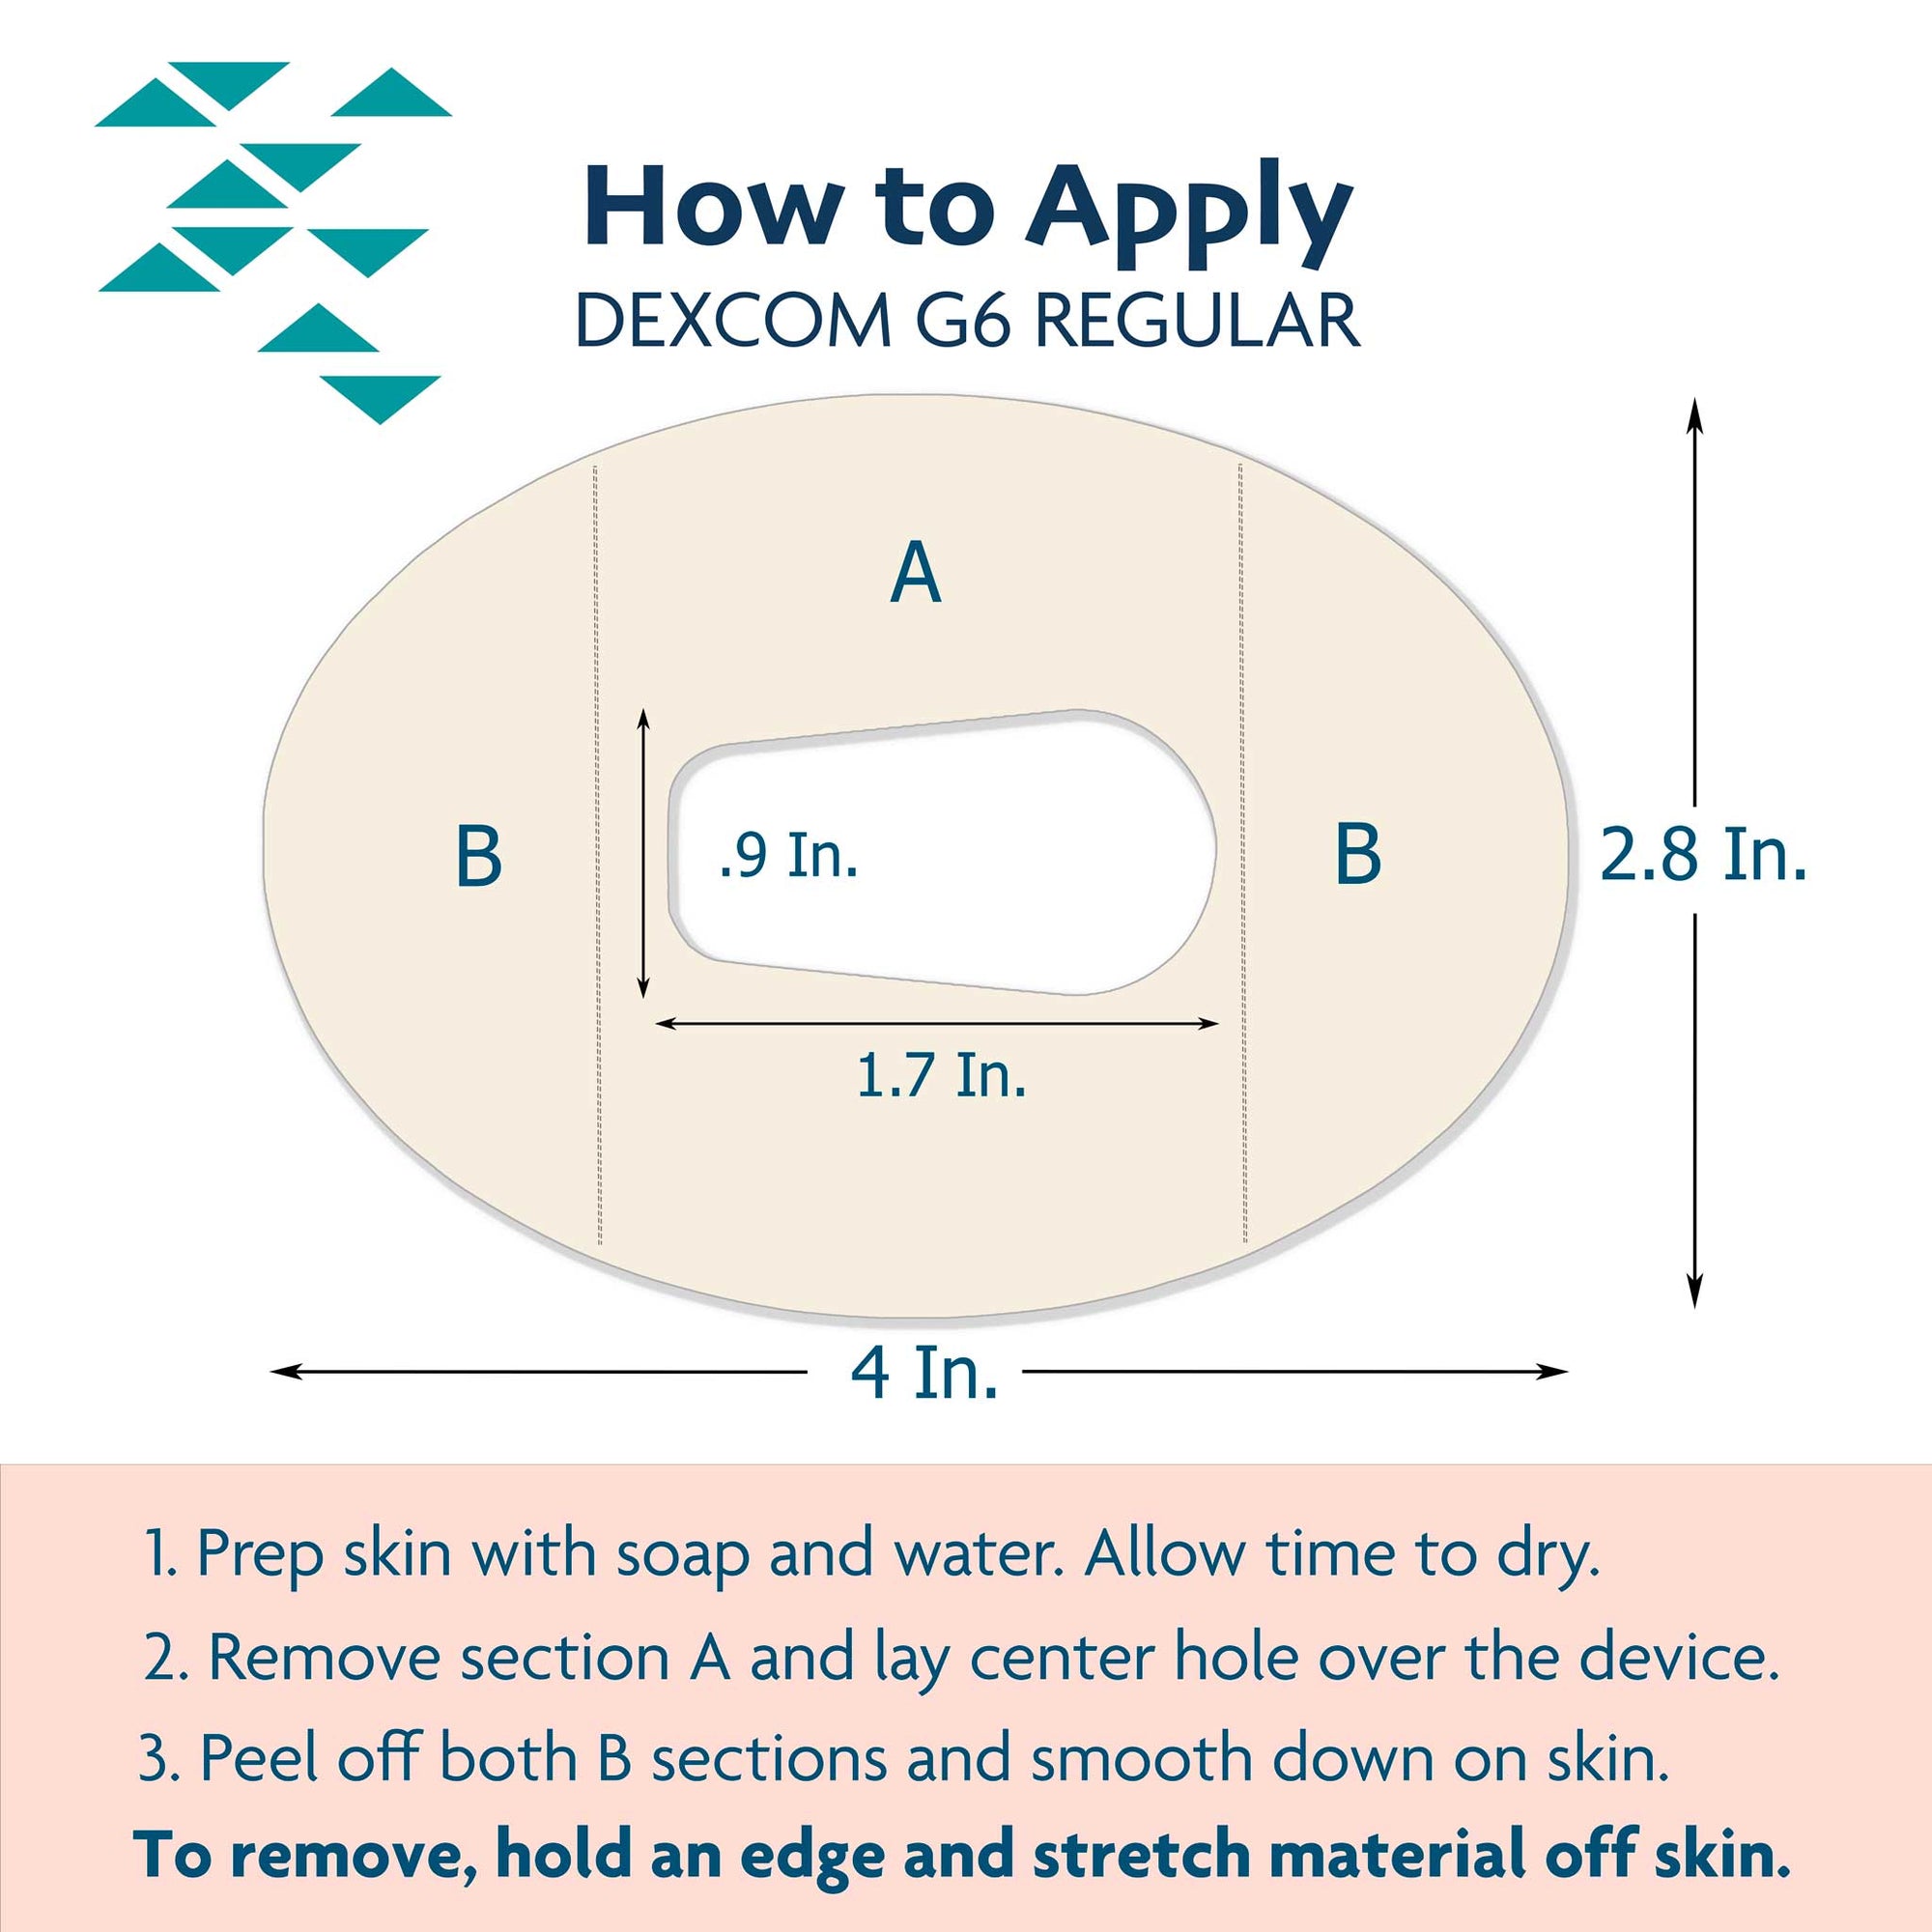 ExpressionMed Dexcom G6 Patch Application Instructions and Dimensions